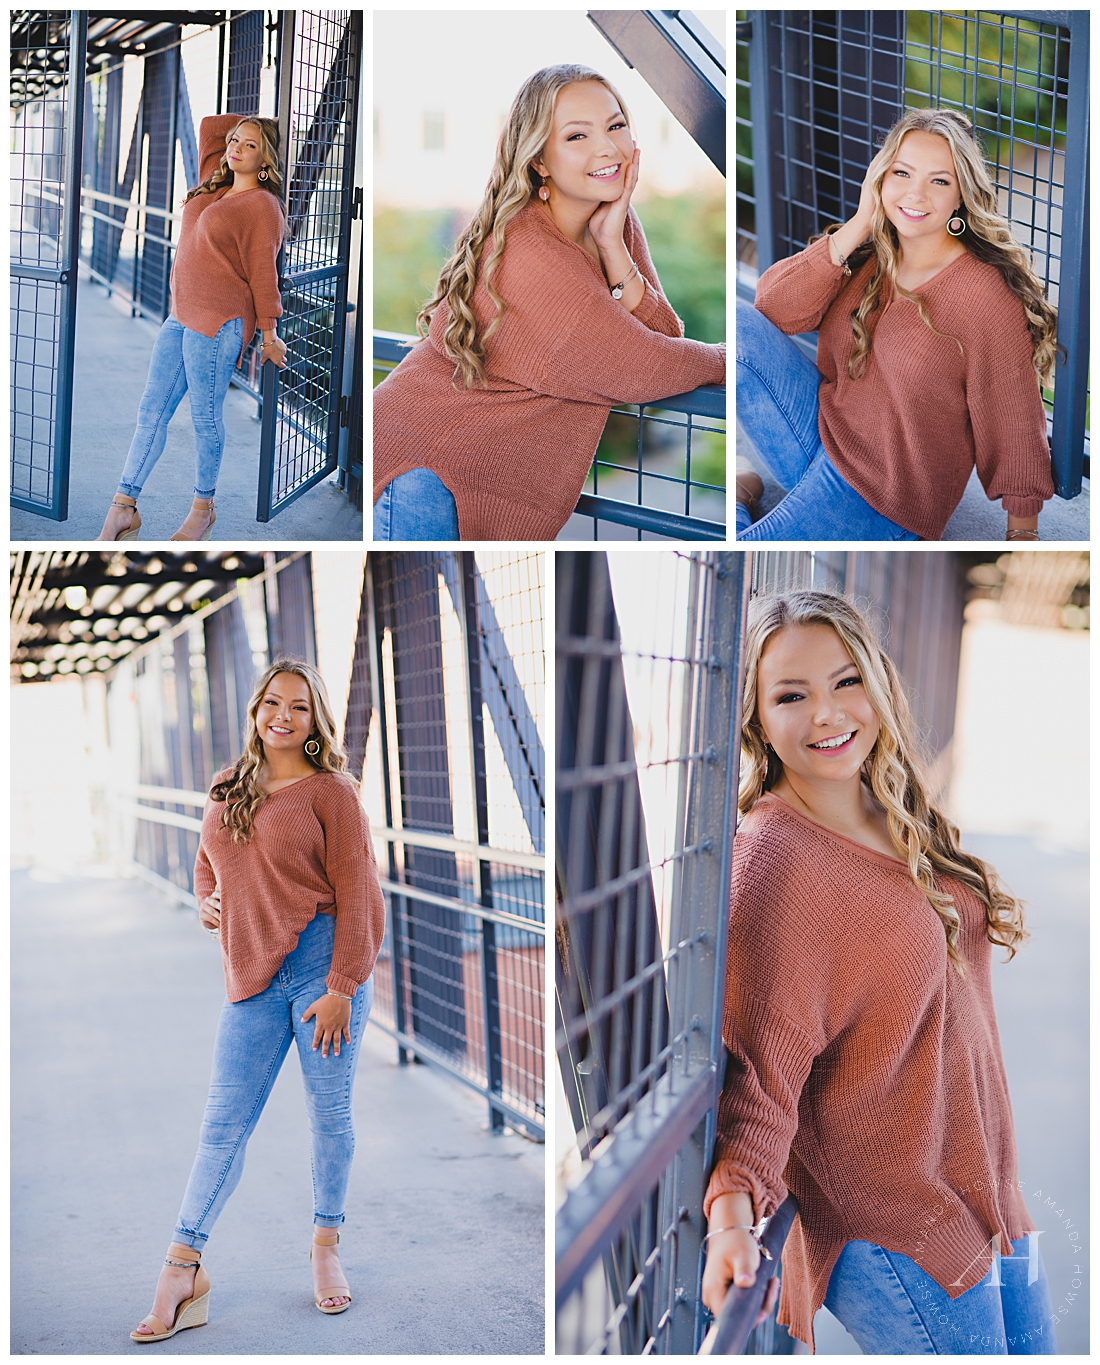 Modern senior portraits | How to style jeans and a knit top for senior portraits, outfit ideas, pose inspiration, the best spot for Tacoma senior portraits | Photographed by the Best Tacoma Senior Photographer Amanda Howse